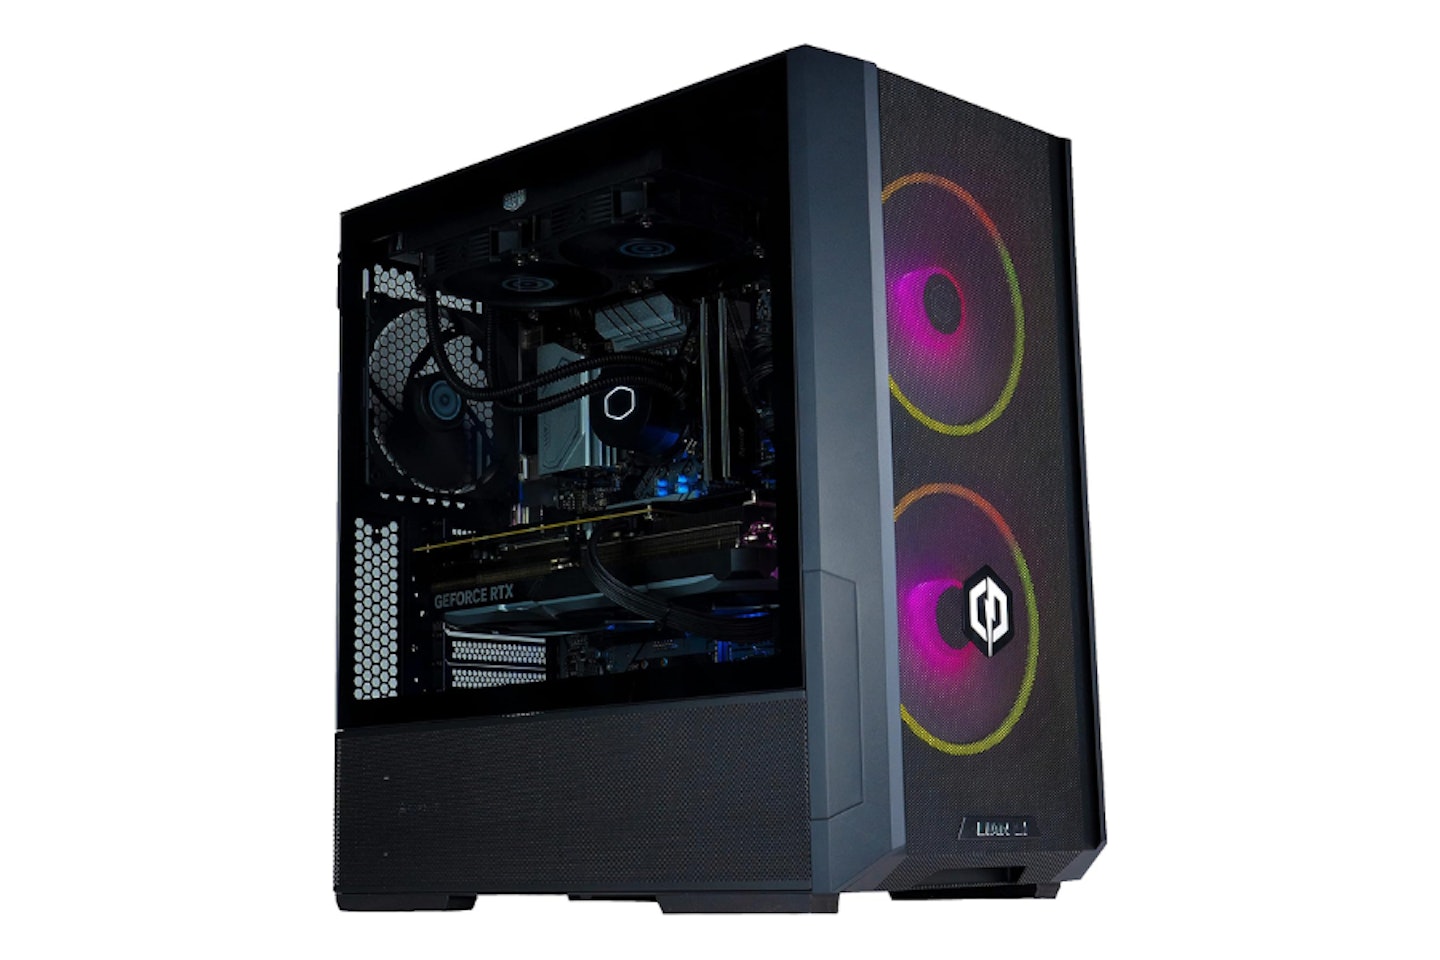  CYBERPOWERPC Centurion Gaming PC - Intel Core i9 - one of the best PCs for video editing